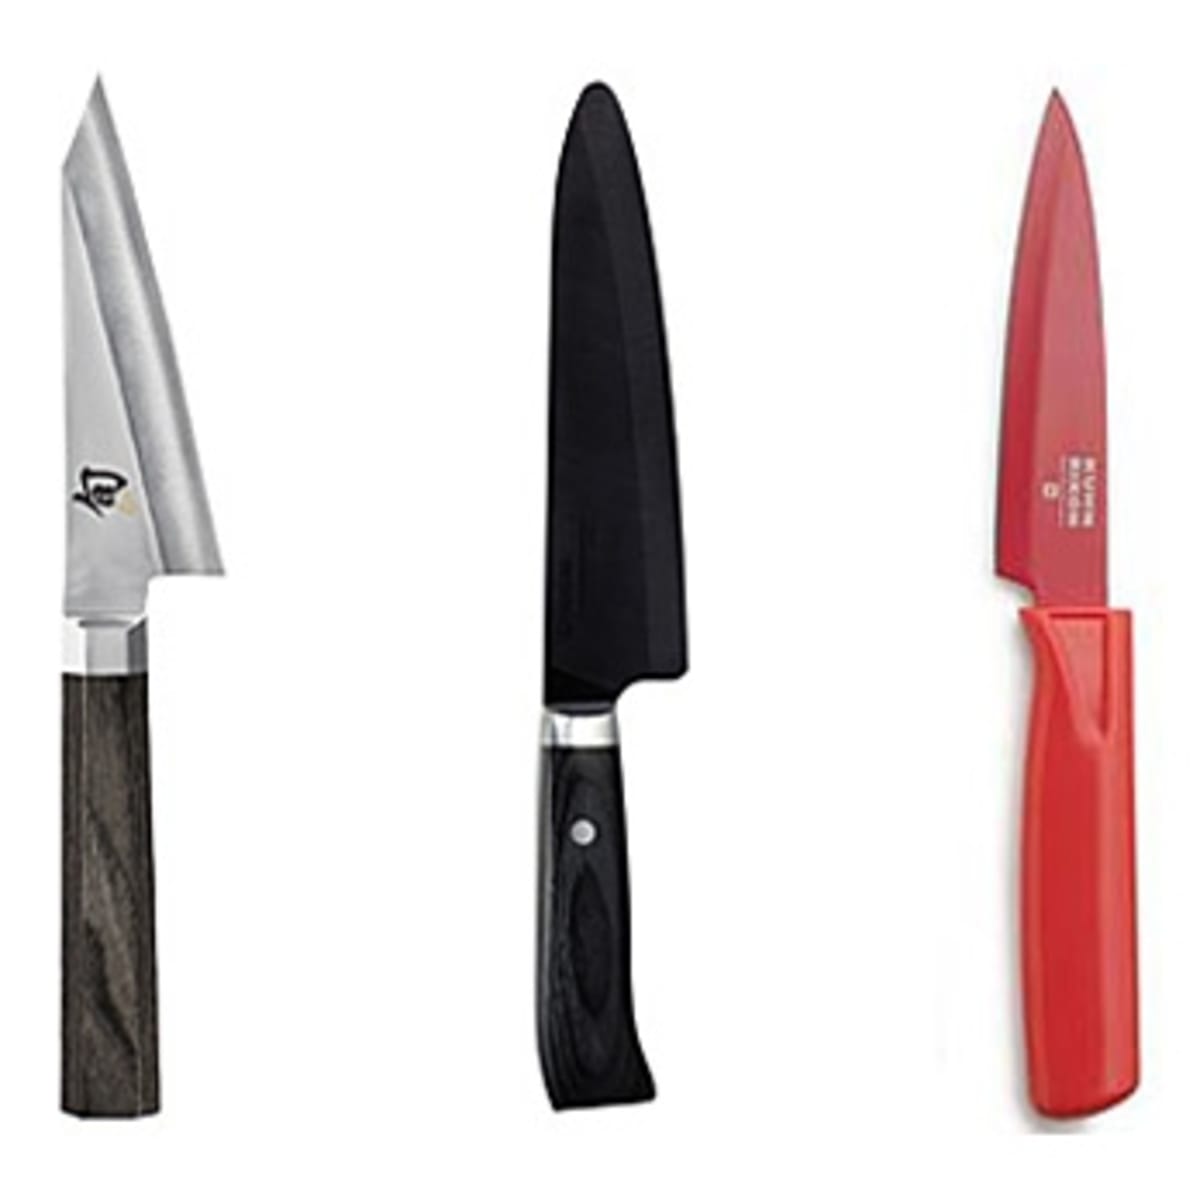 The 7 Best Kitchen Knives Under 50 Dollars in 2023 - Flavor Thoughts